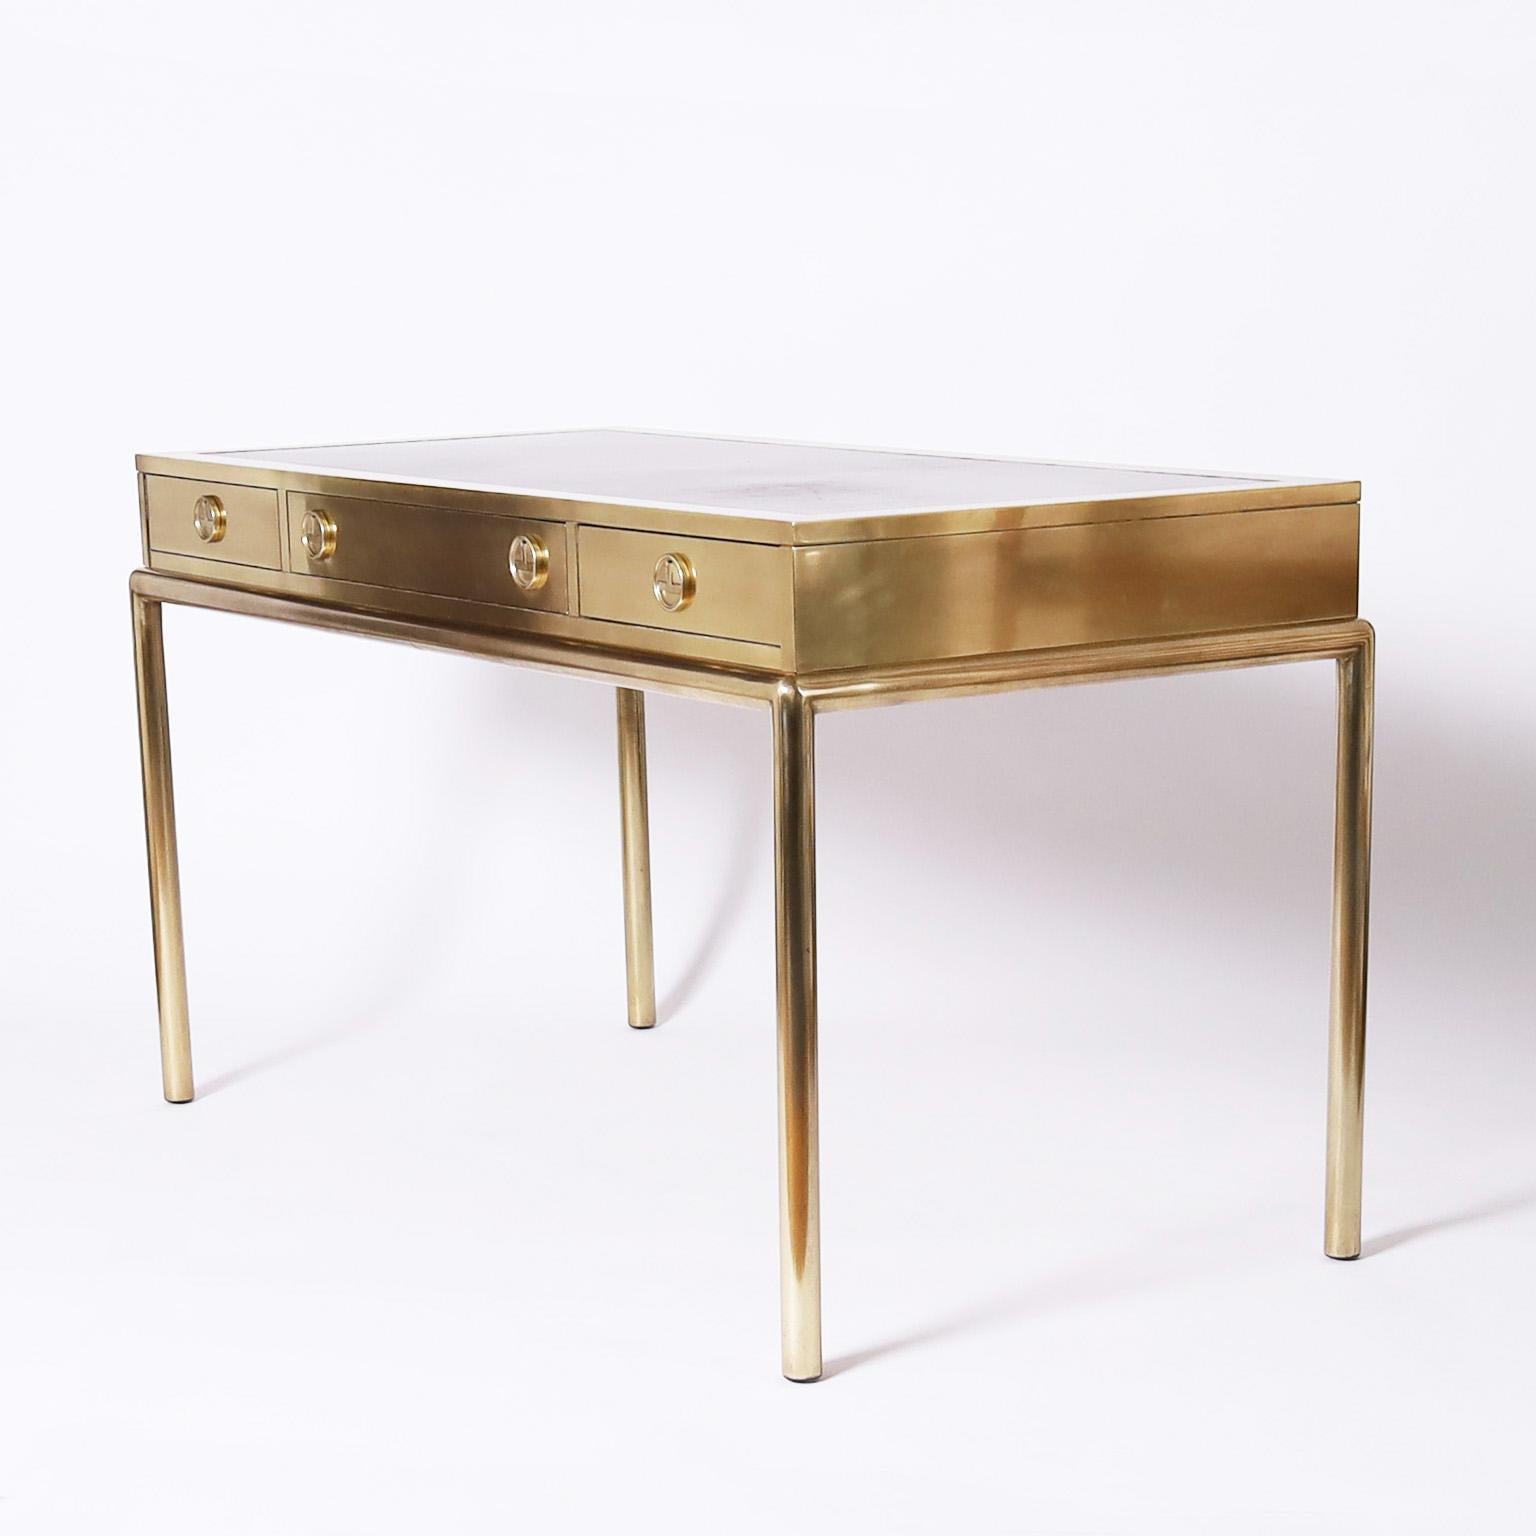 Campaign Brass Leather Top Desk by Mastercraft